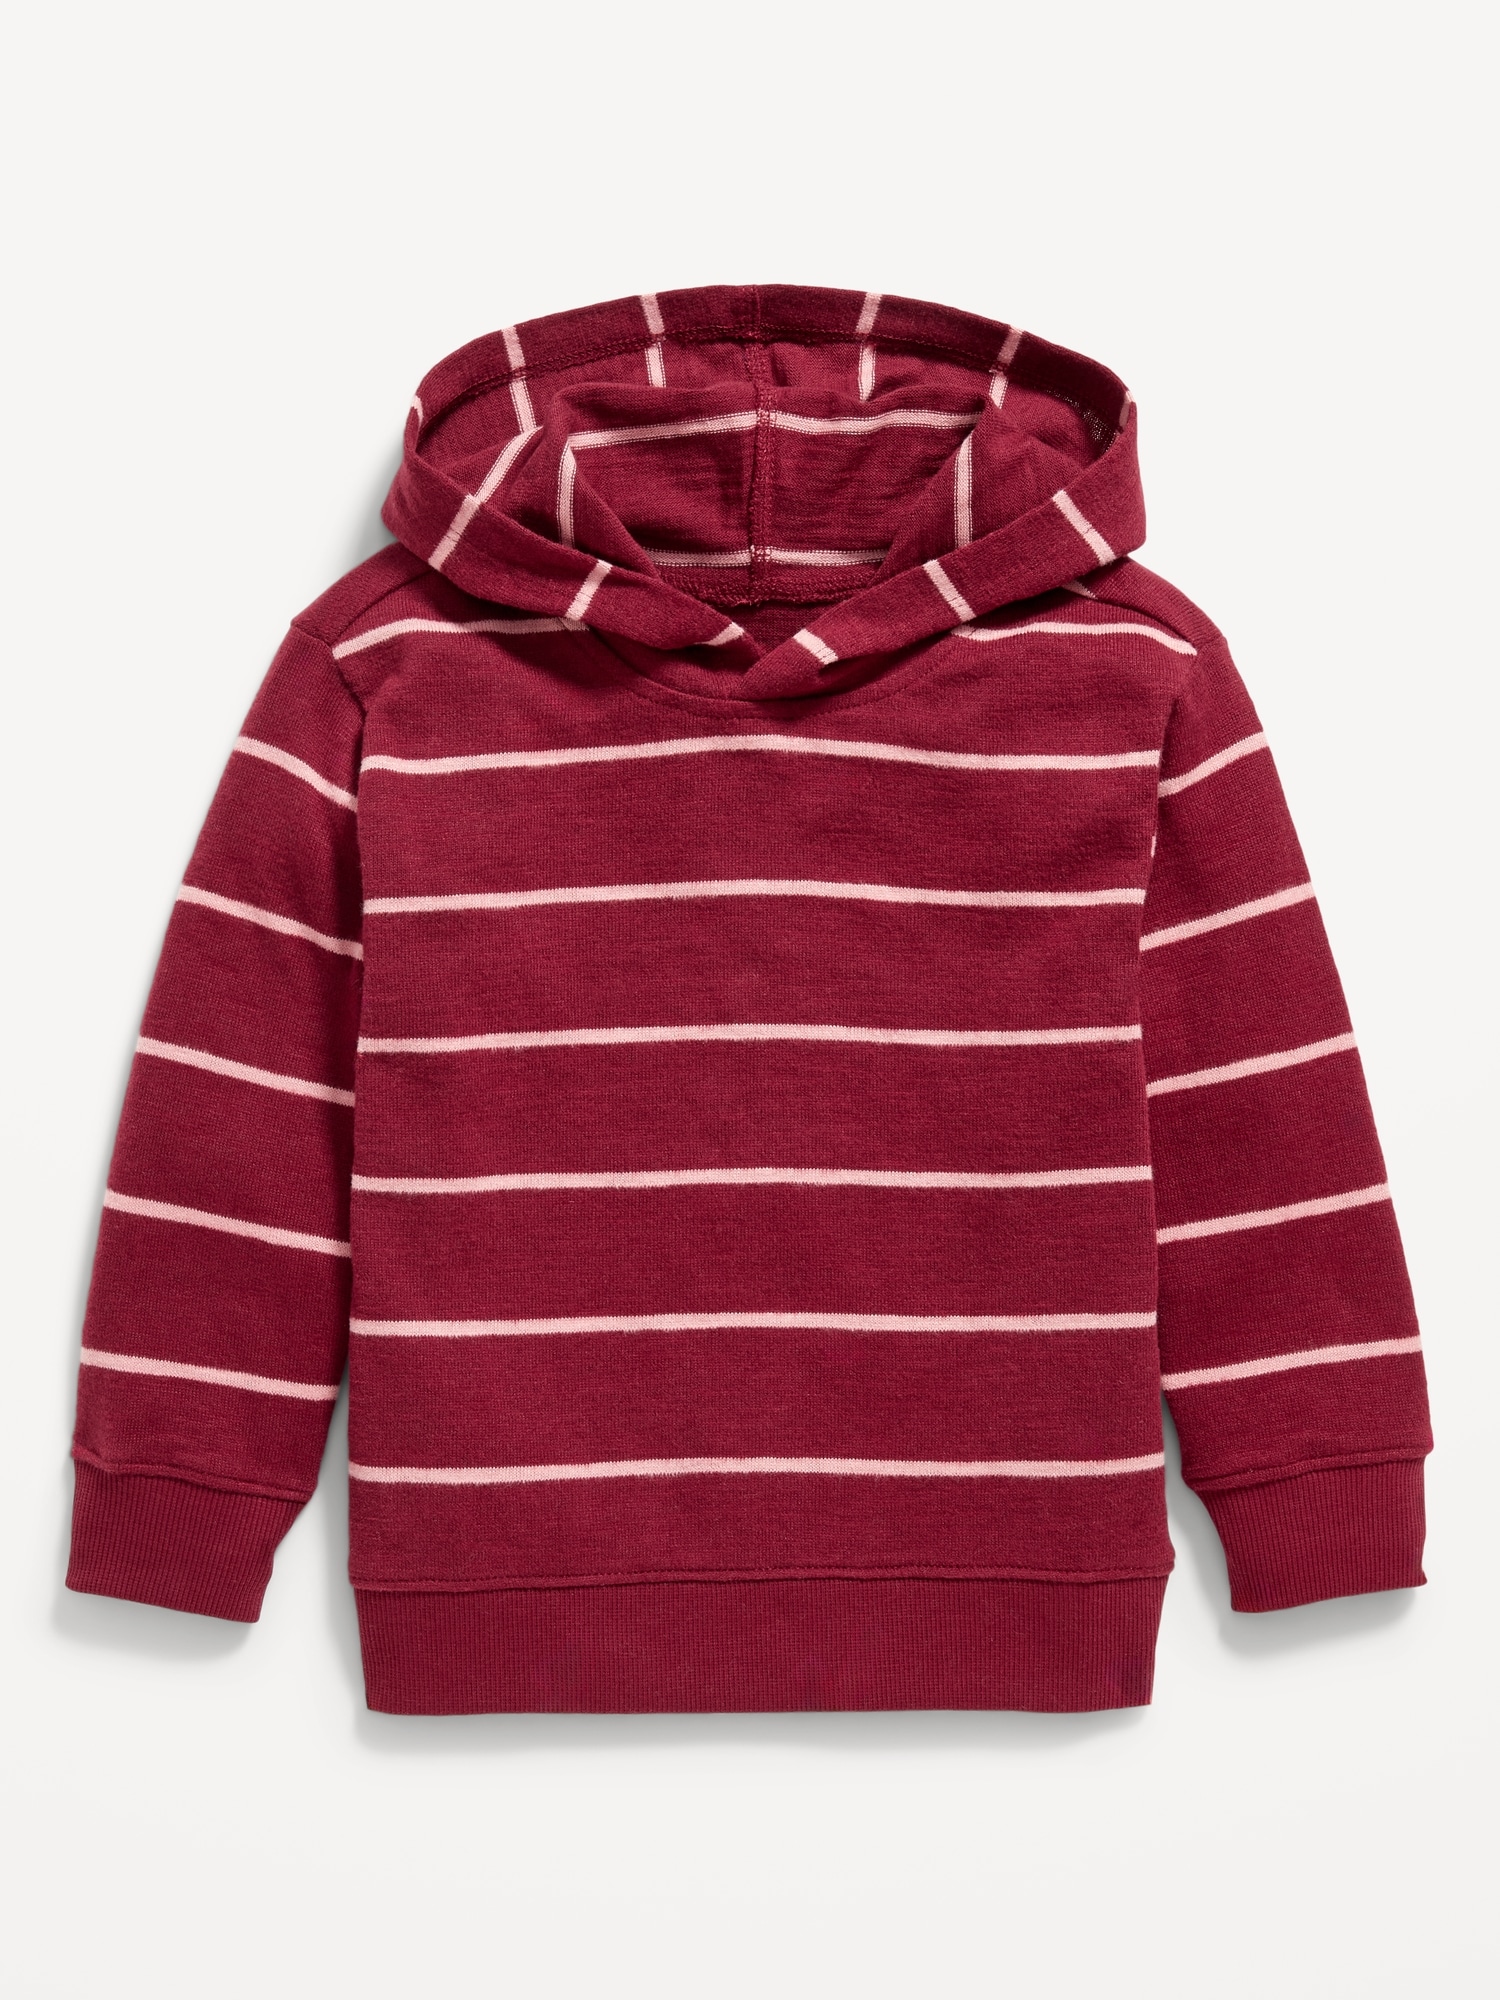 Striped Cozy-Knit Pullover Hoodie for Toddler Boys